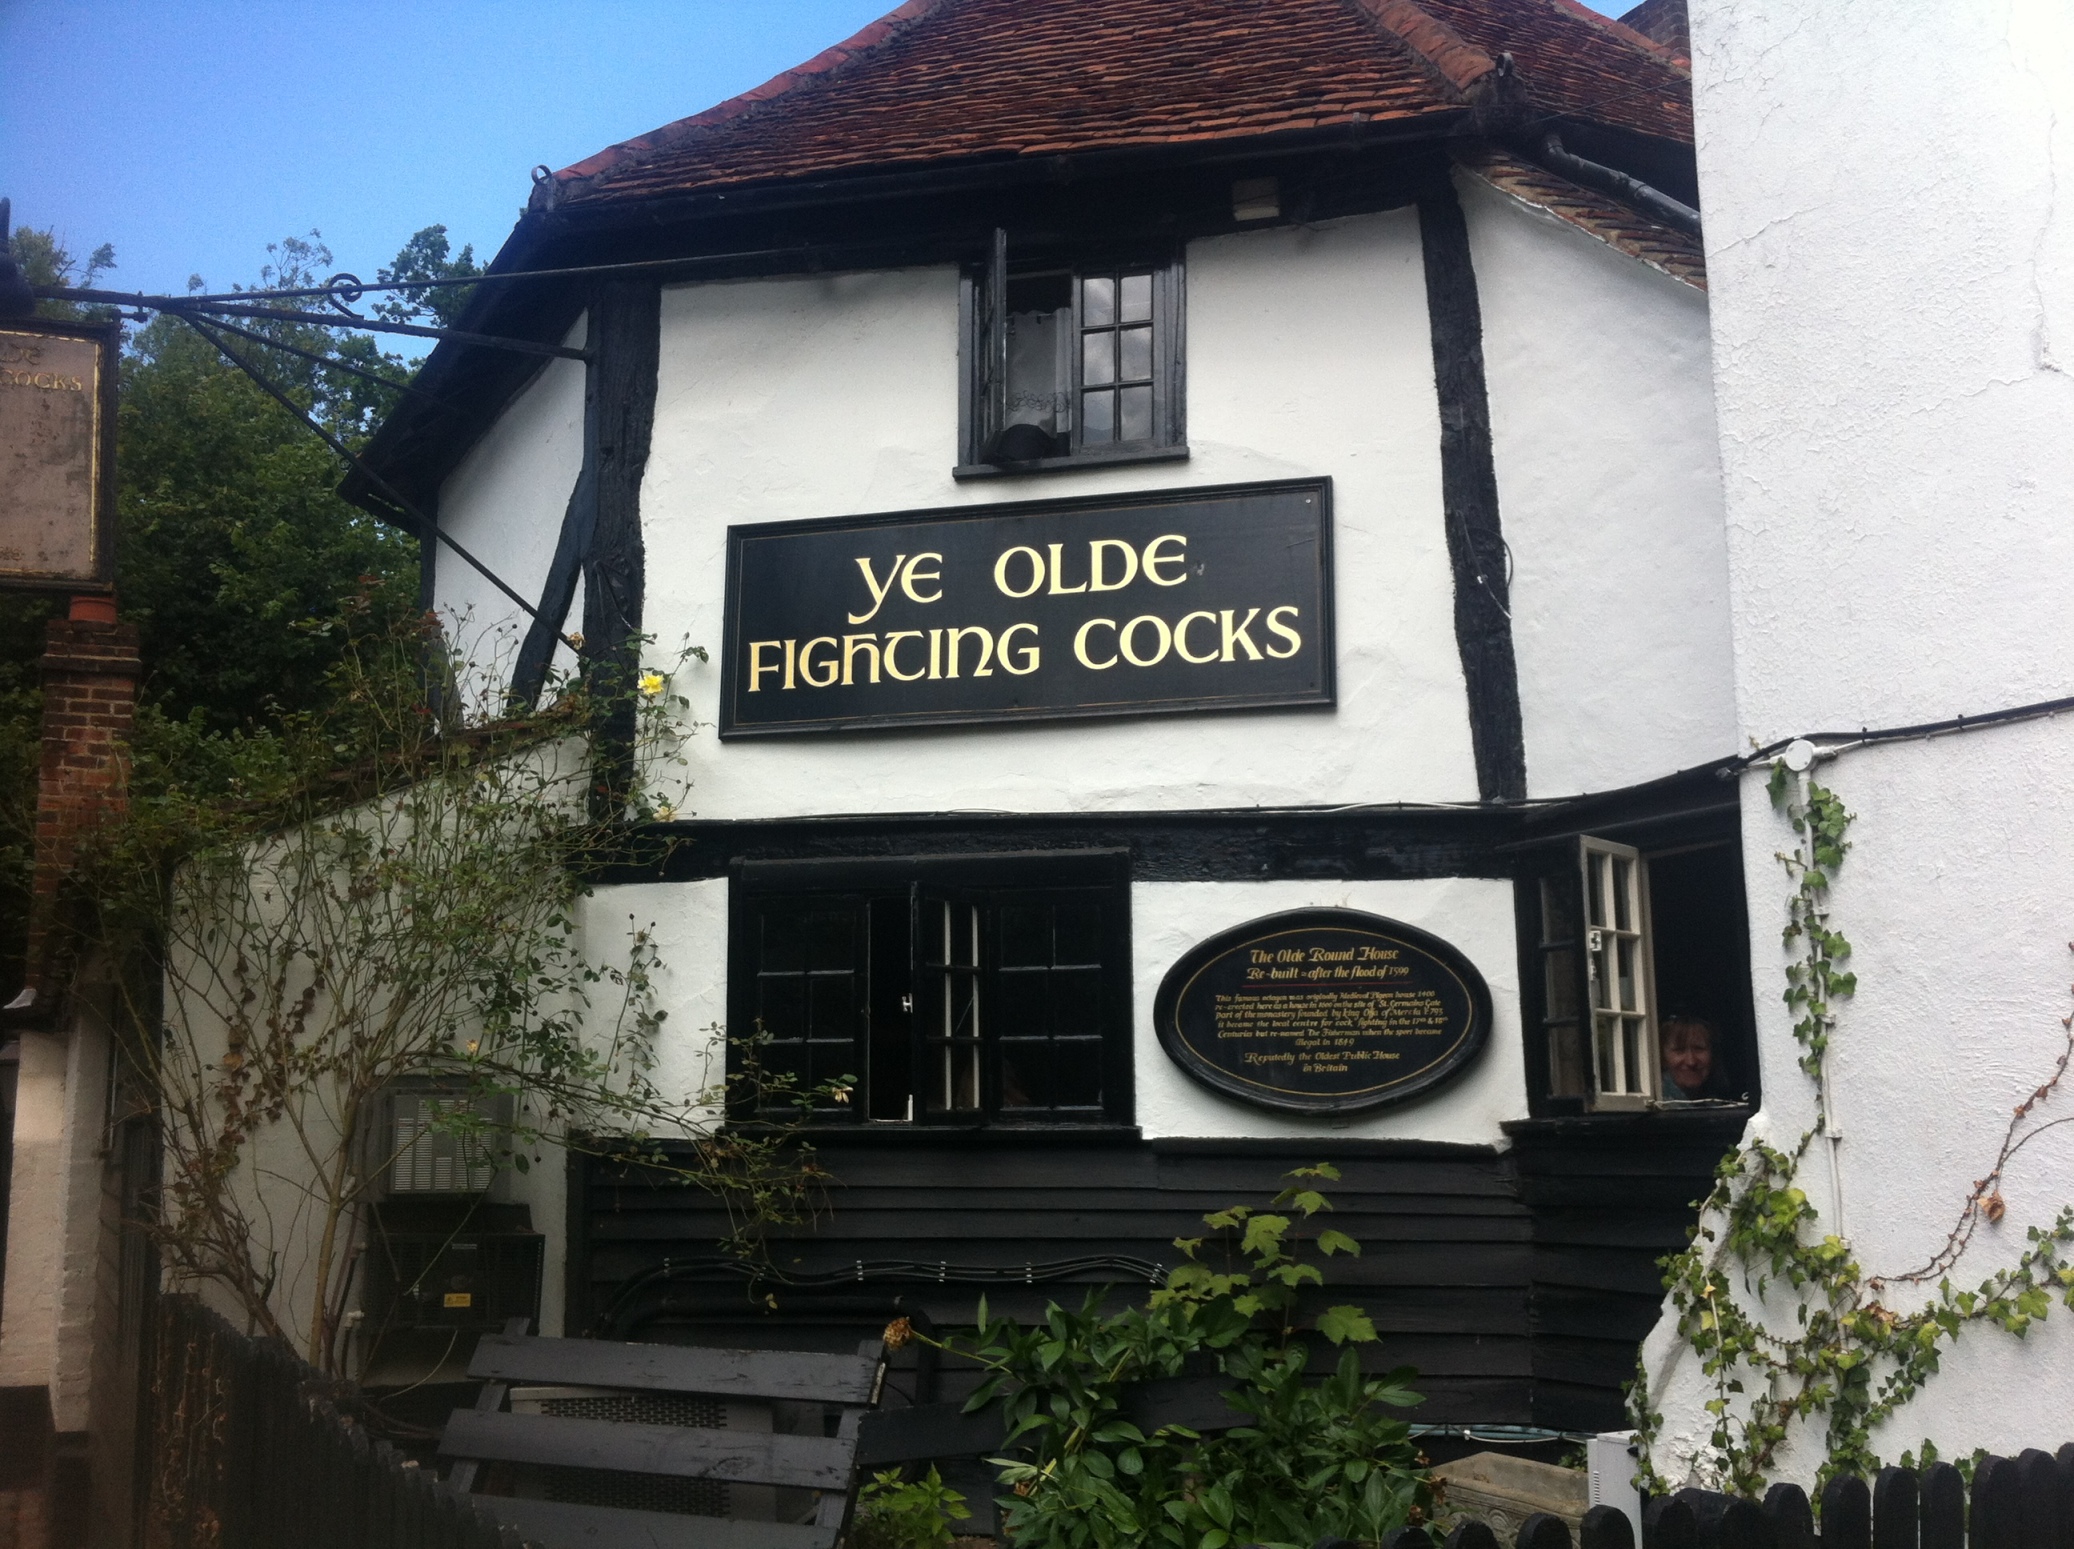 Ye Olde Fighting Cocks, the Oldest Pub in England